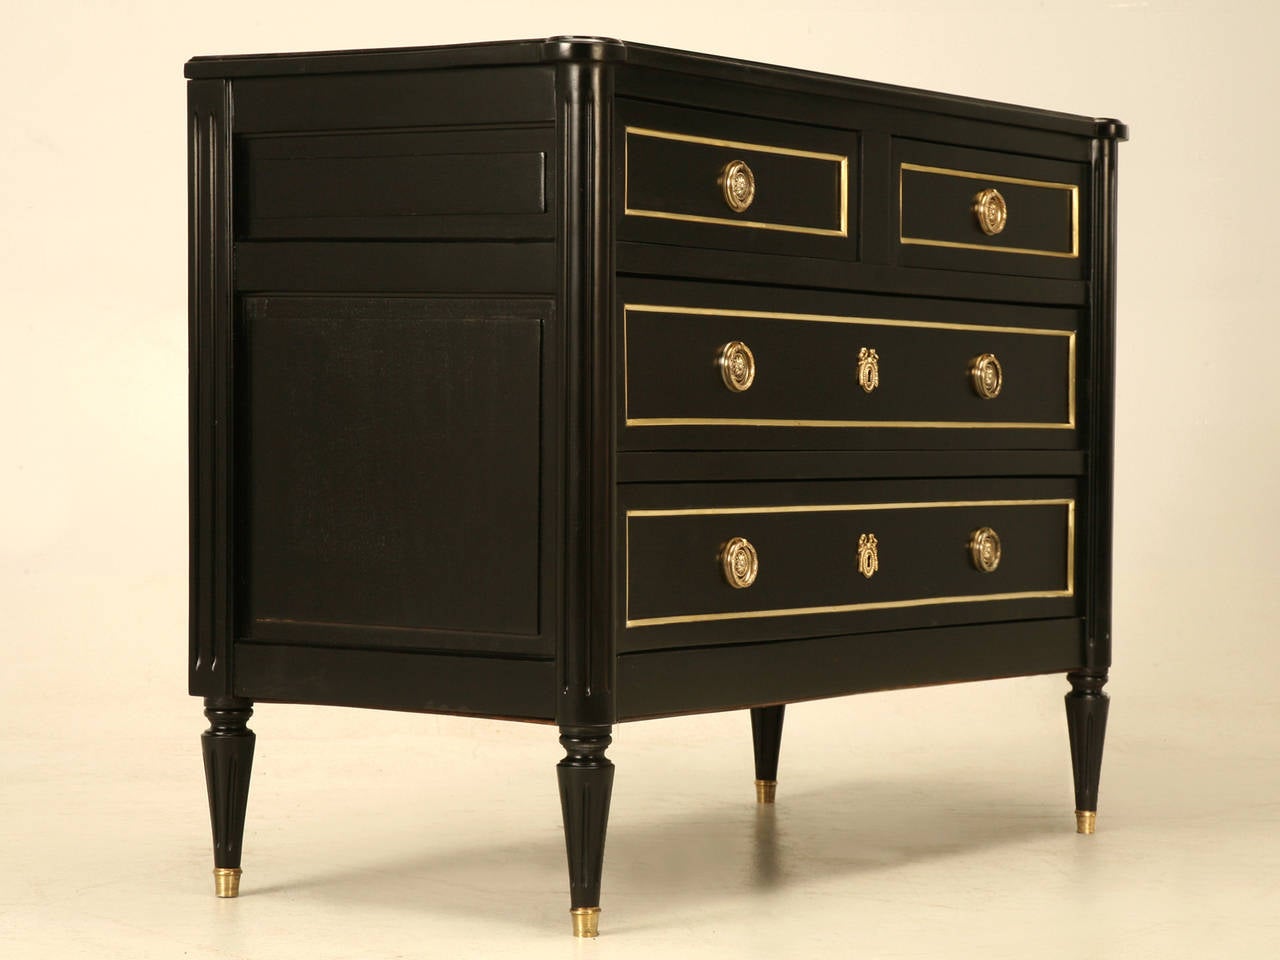 French Louis XVI ebonized commode with brass trim and hardware. Whomever made this commode and it certainly was in the 1900s, used the same techniques as craftsmen from the late 1700s. Take notice of the hand-cut dove-tailed drawers, which are